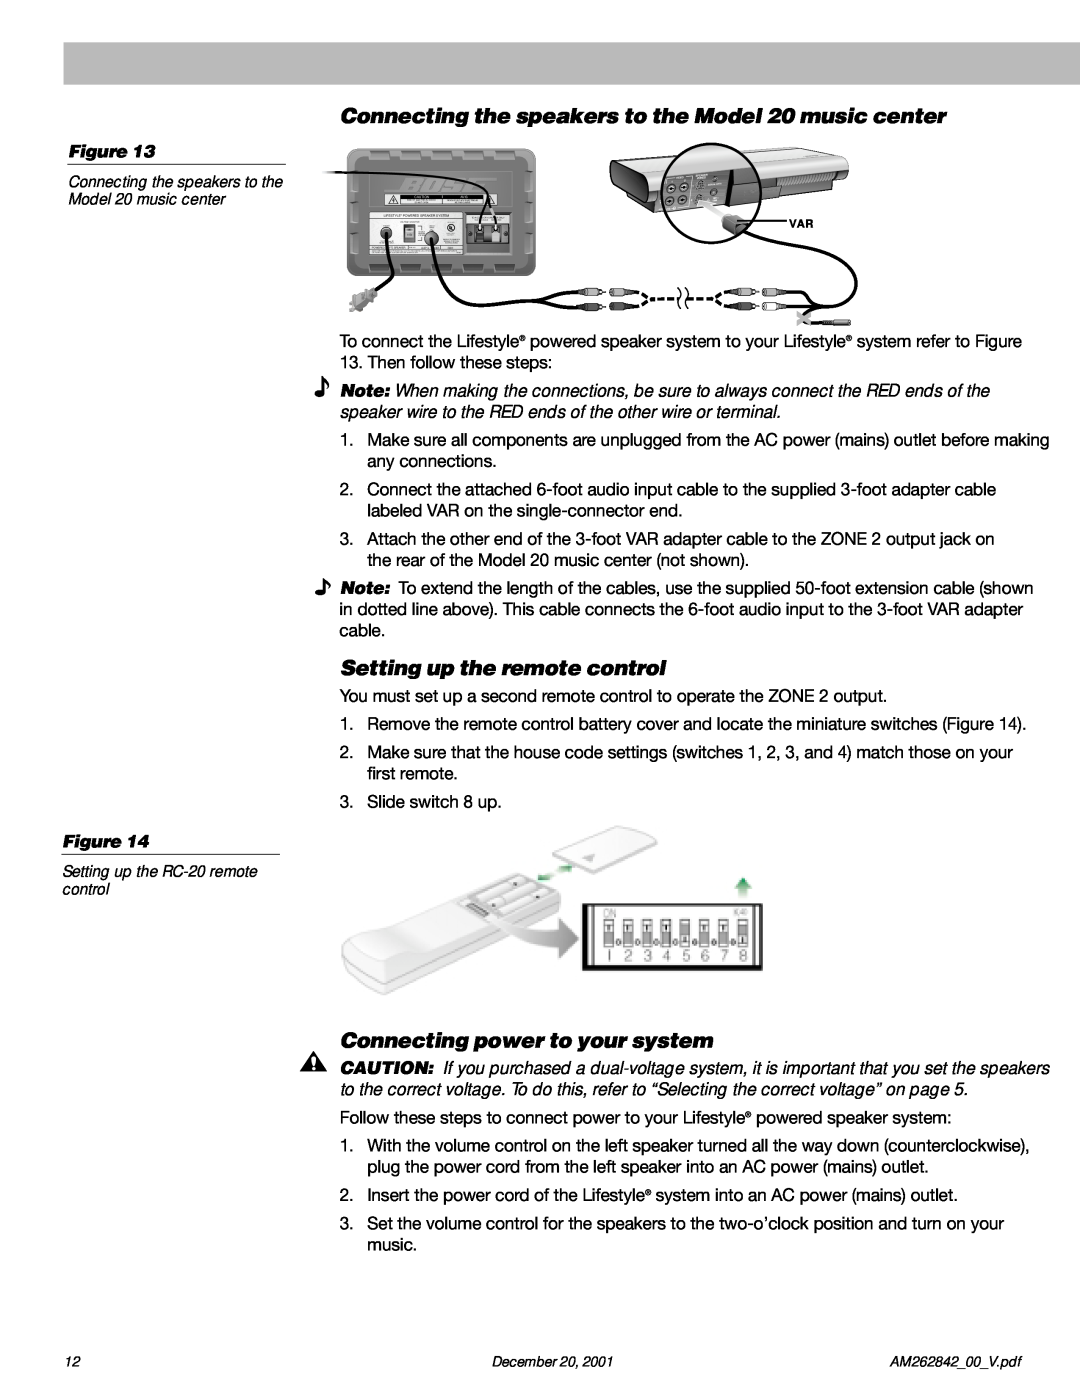 Bose Surround Sound Speaker System manual Setting up the remote control, Connecting power to your system 